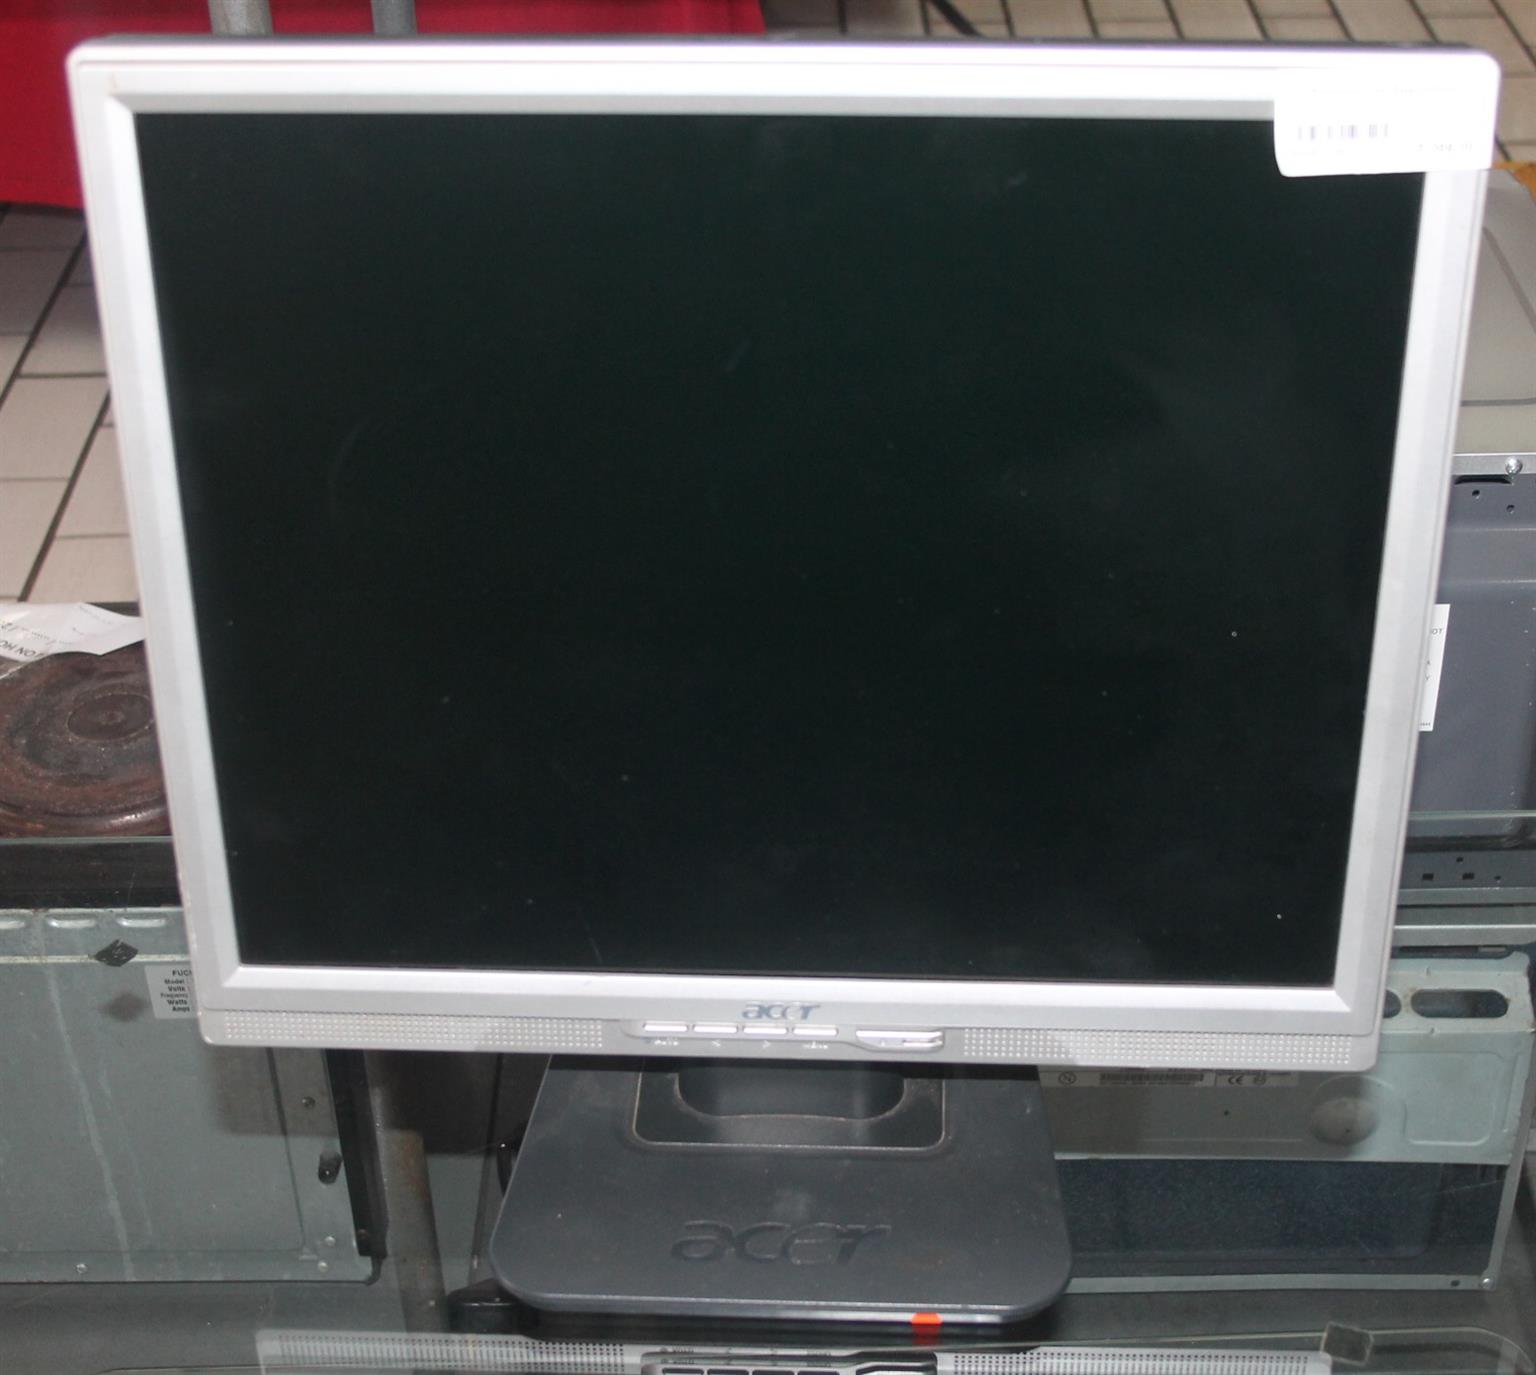 Acer 19 inch lcd monitor S048313A #Rosettenvillepawnshop